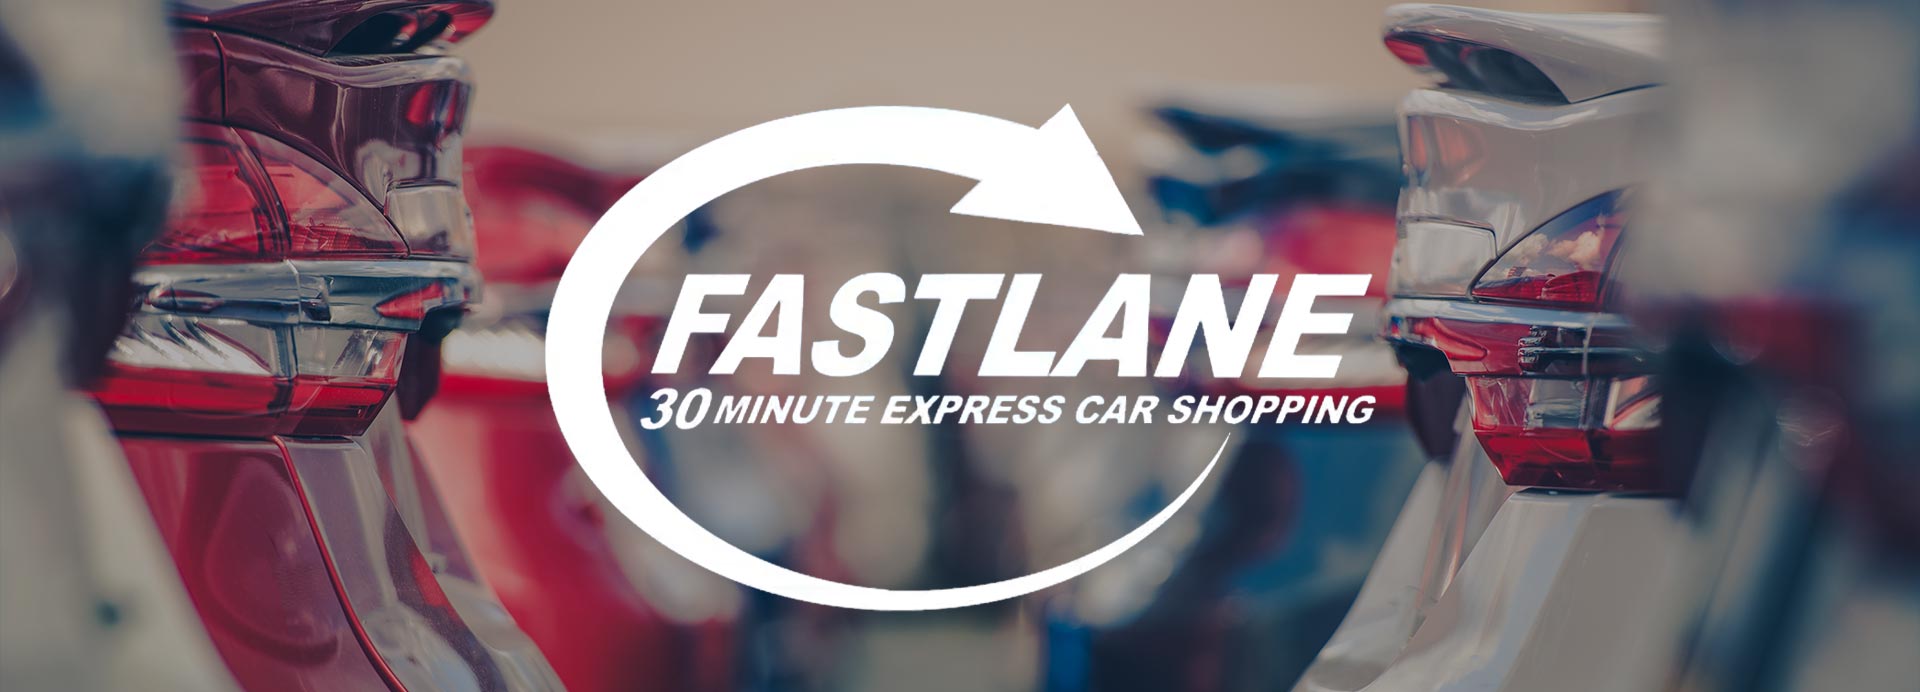 Fastlane 30-Minute Express Car Shopping Experience